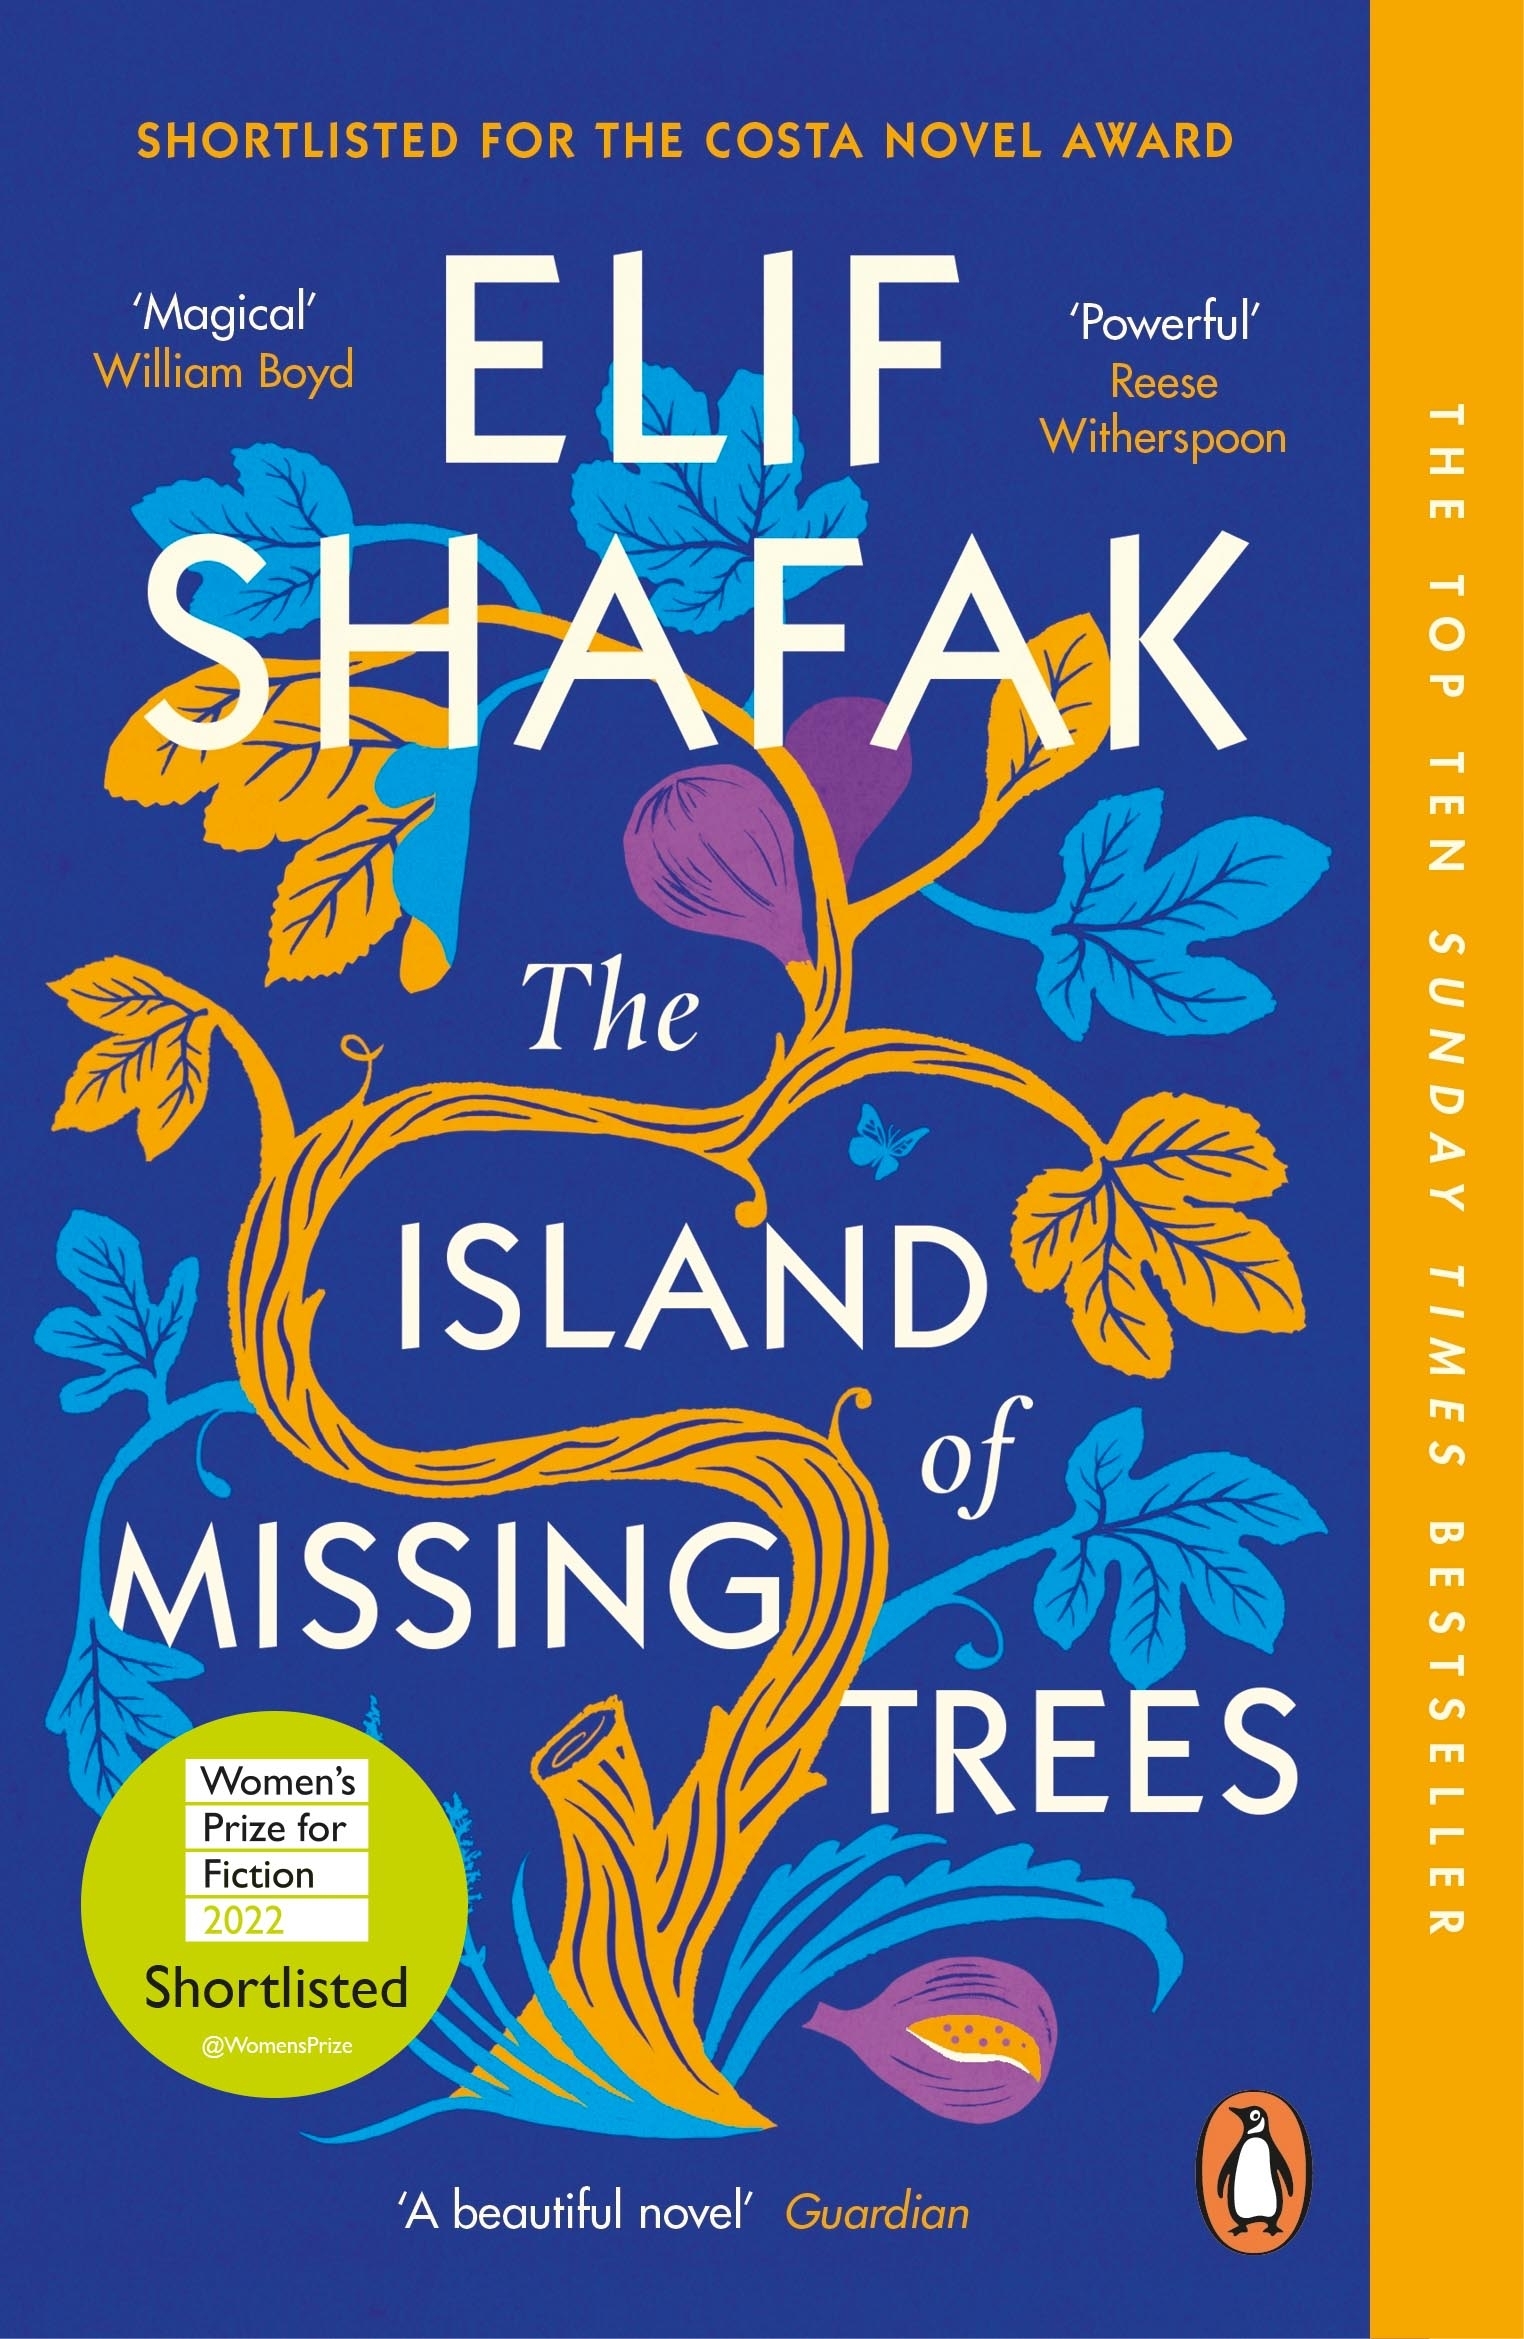 Book cover of The Island of Missing Trees by Elif Shafak. Blue background with colourful illustrated tree.